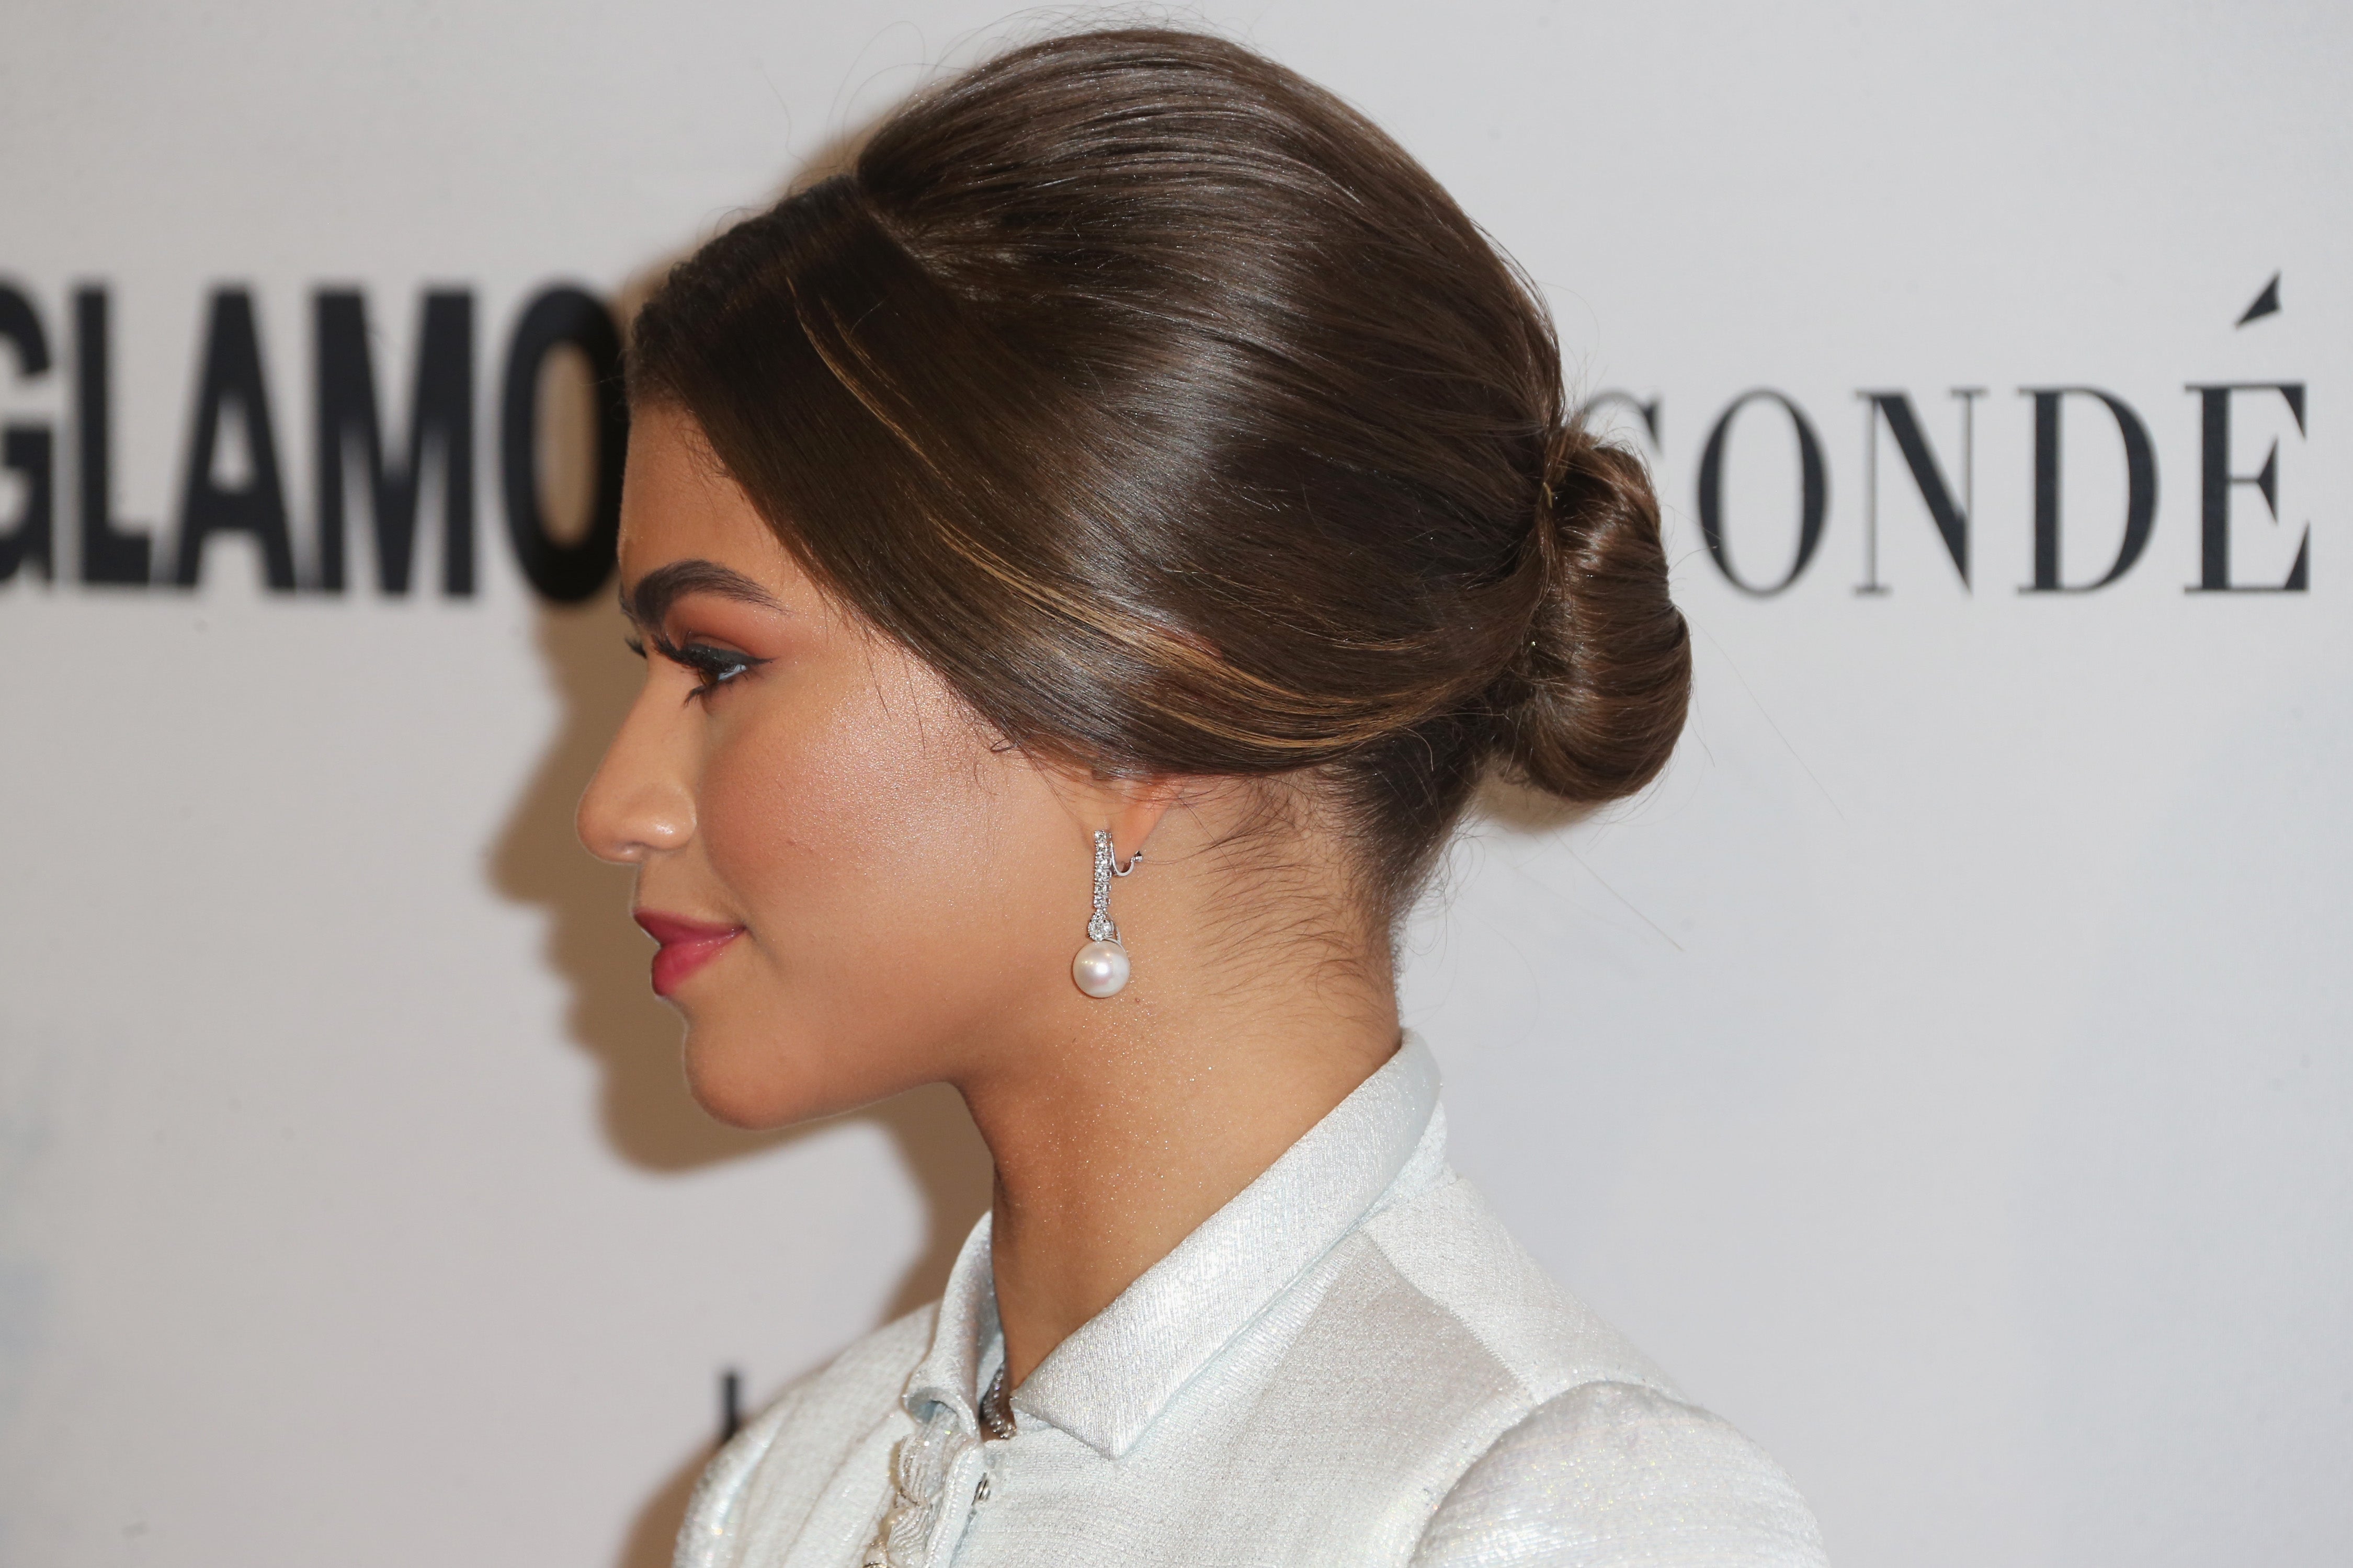 23 Party-Proof Updos That Are Perfect For Holiday Mixers
